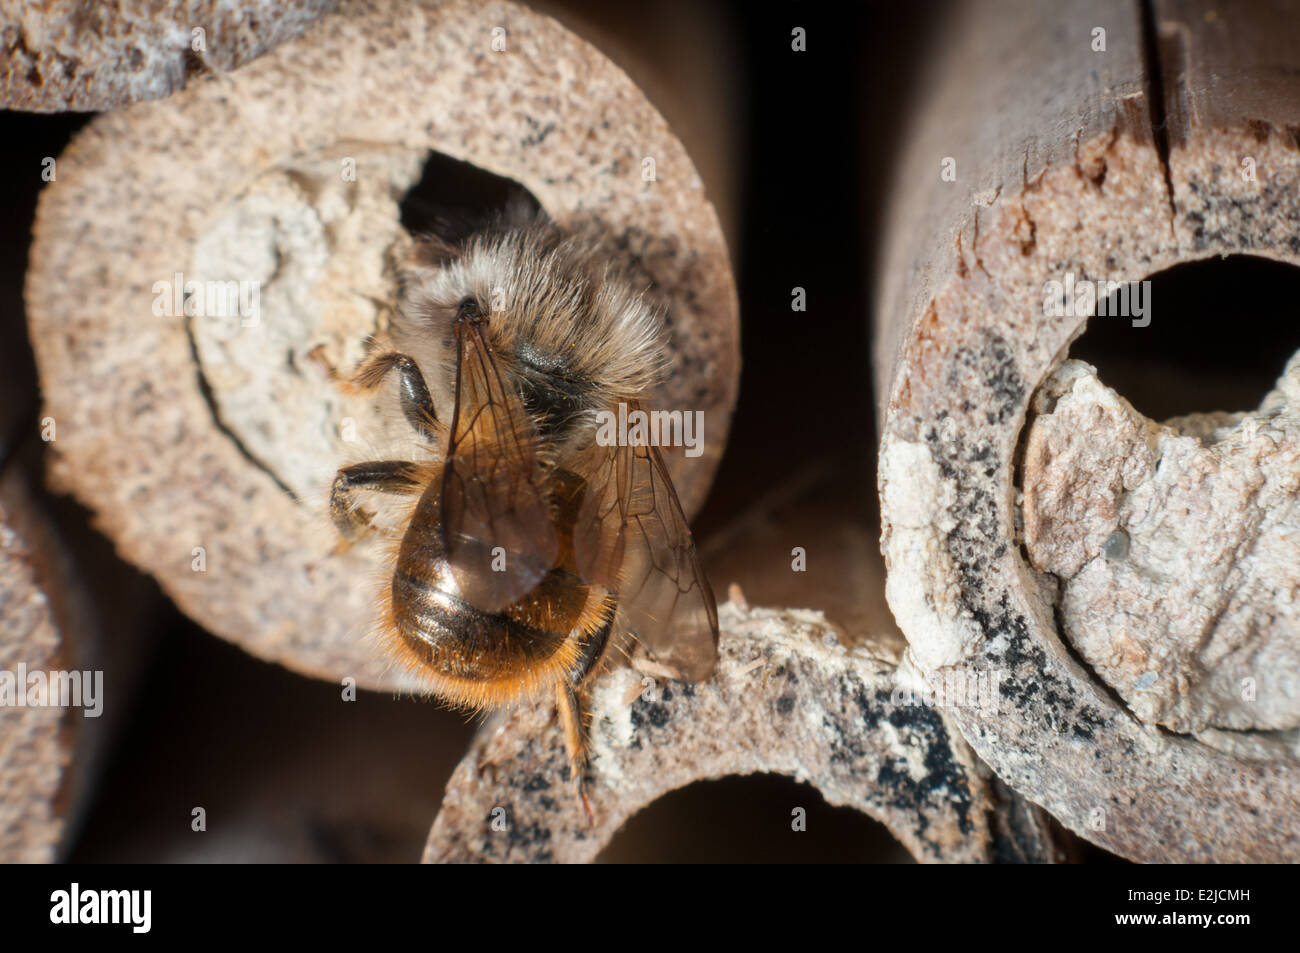 A mason bee, Osmia Bicornis, on a bamboo home for solitary bees in a garden in Exeter, Devon, UK. Stock Photo